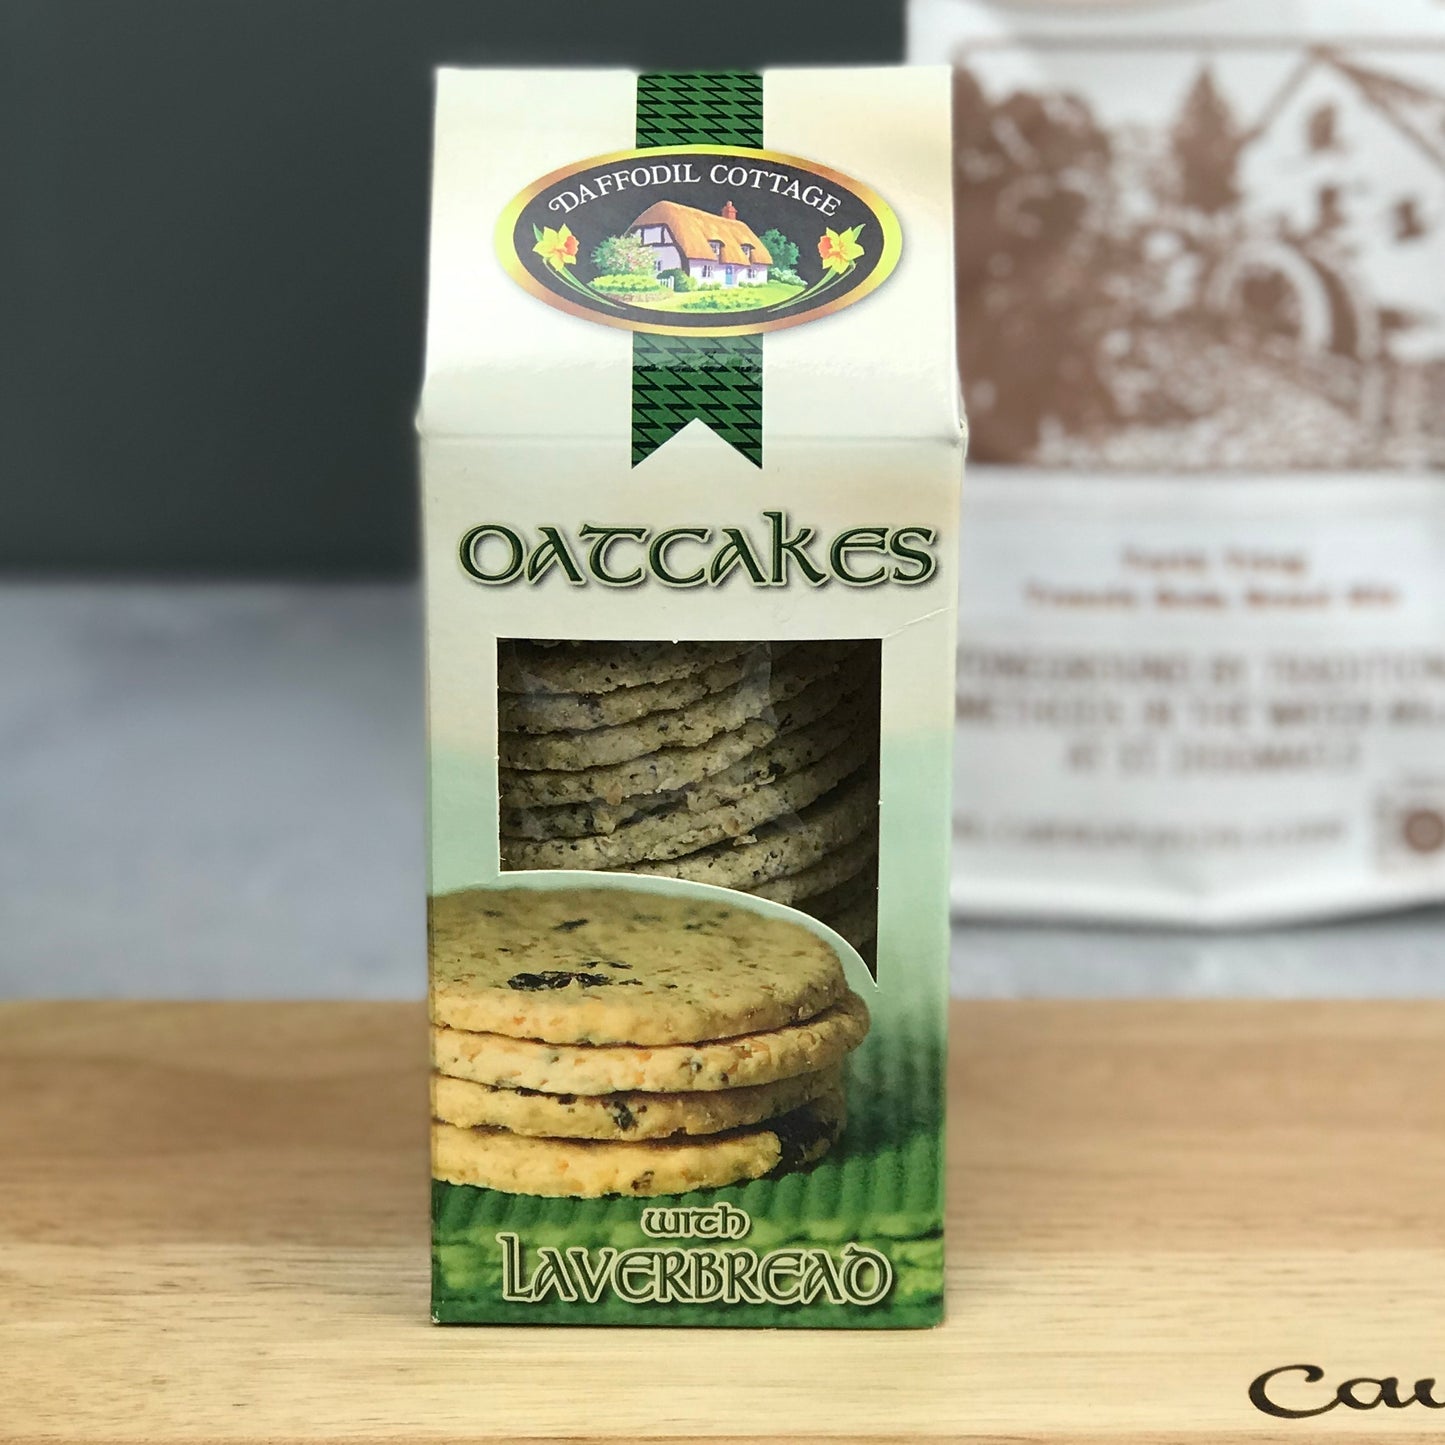 Oatcakes with Laverbread